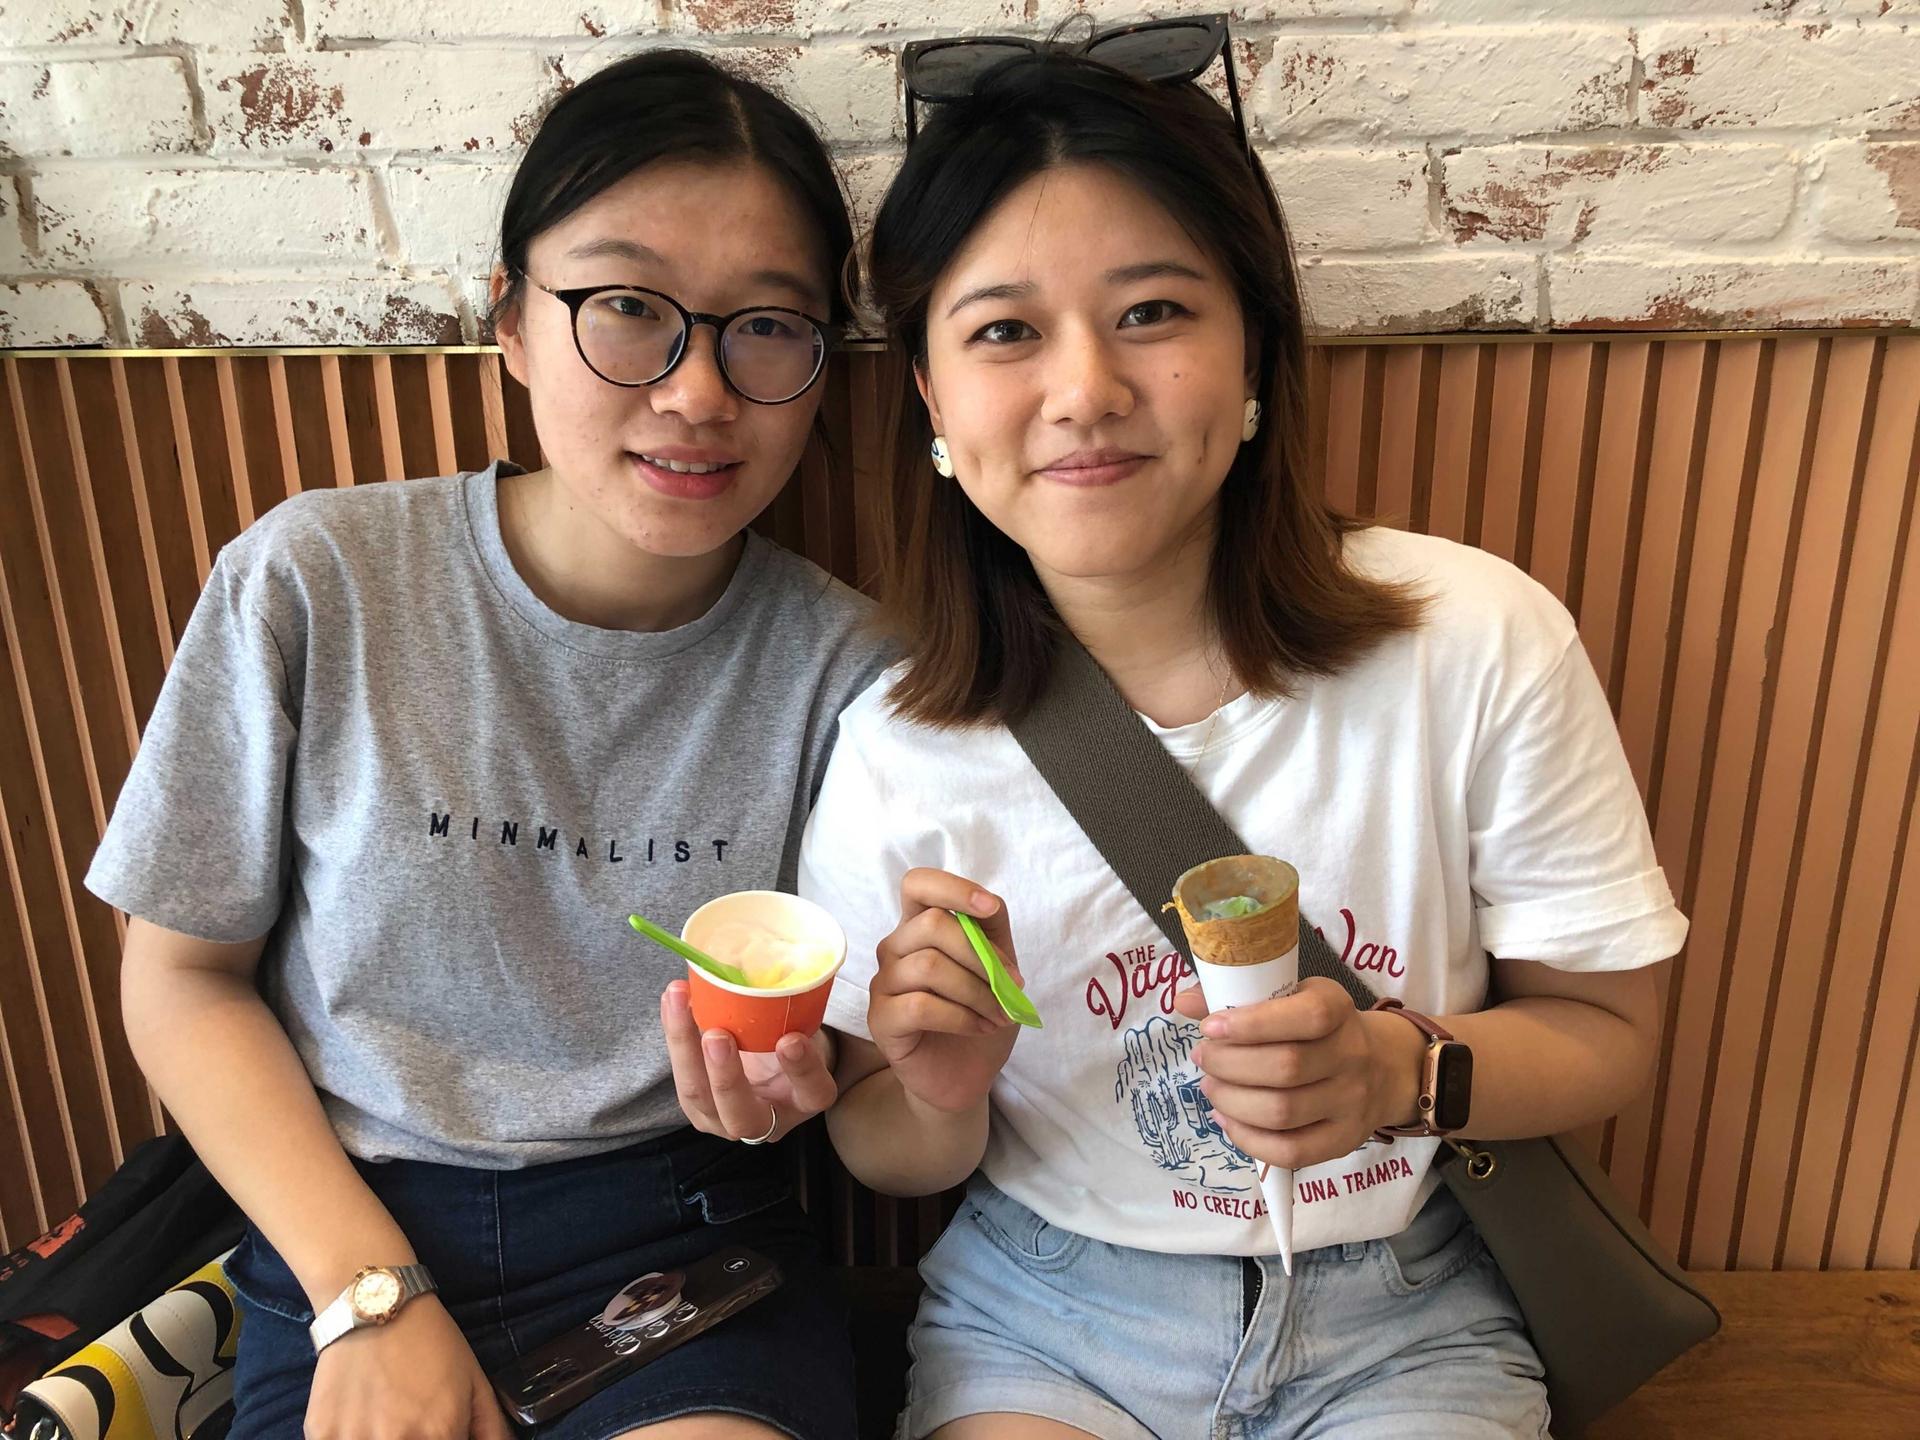 Two women smile for the camera while holding ice cream